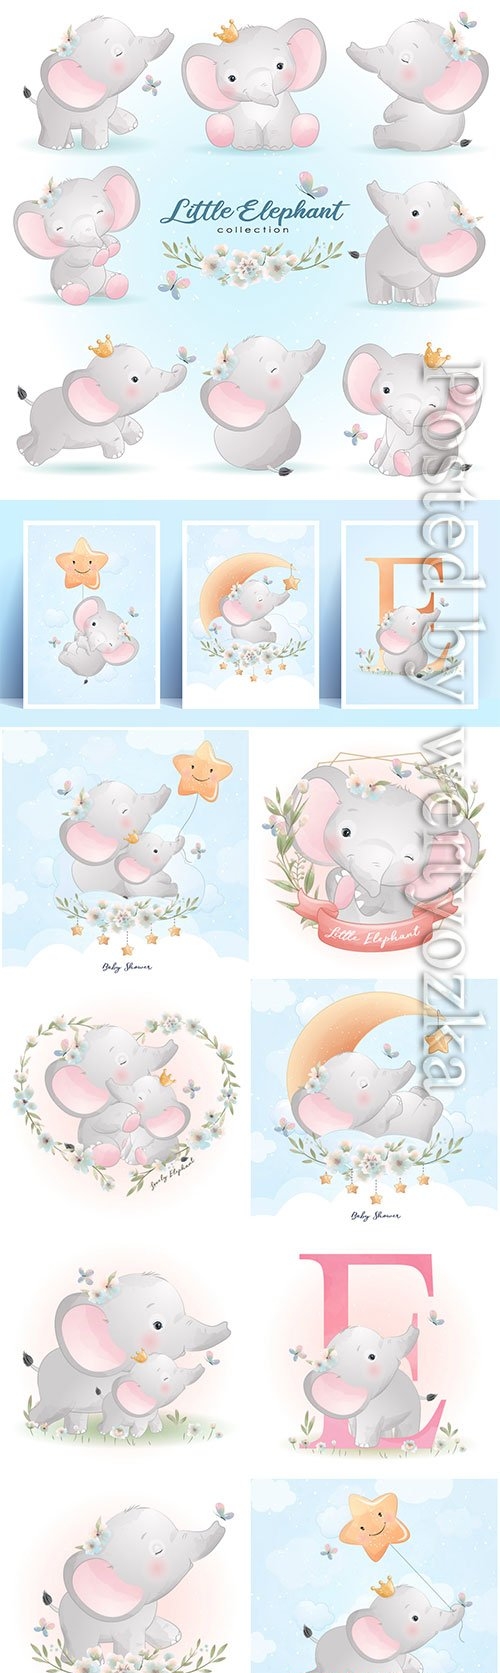 Cute doodle elephant poses with floral illustration premium vector